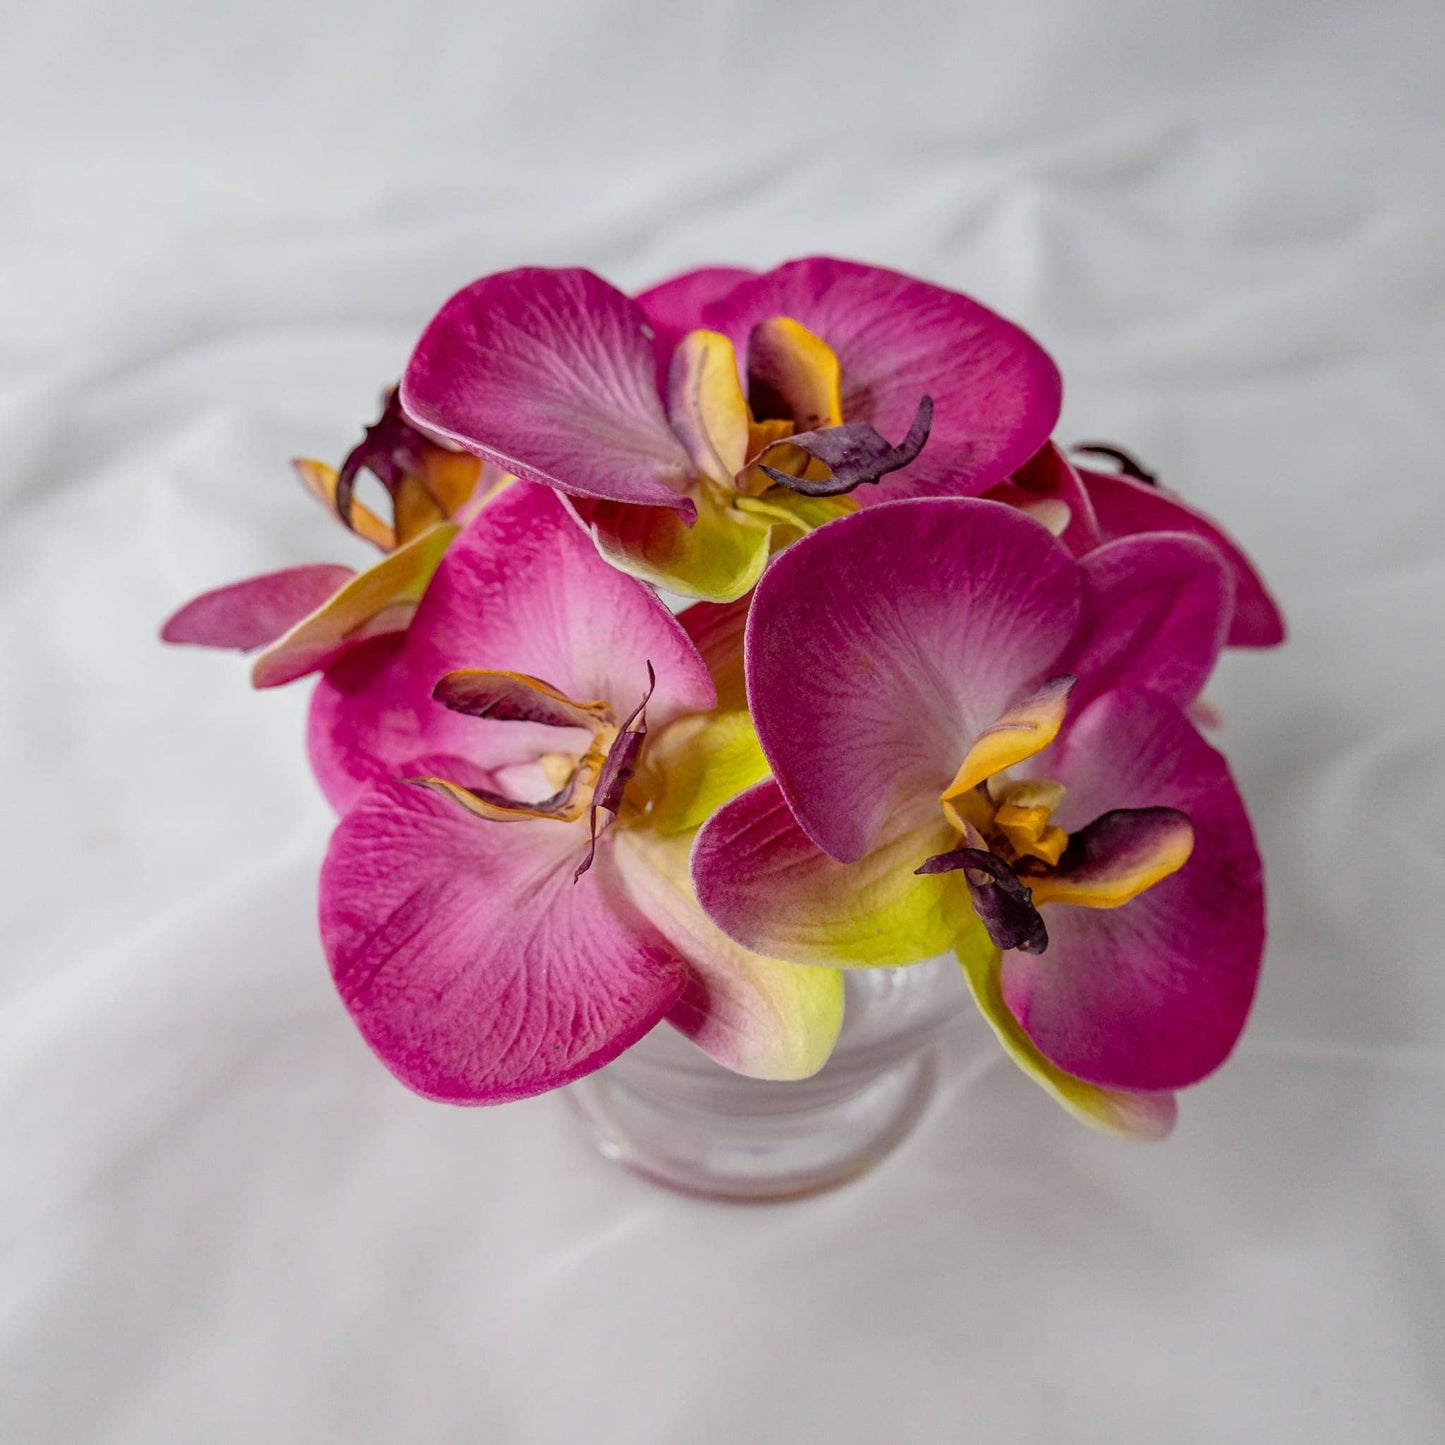 artificial purple pink phalaenopsis flowers placed in transparent glass vase